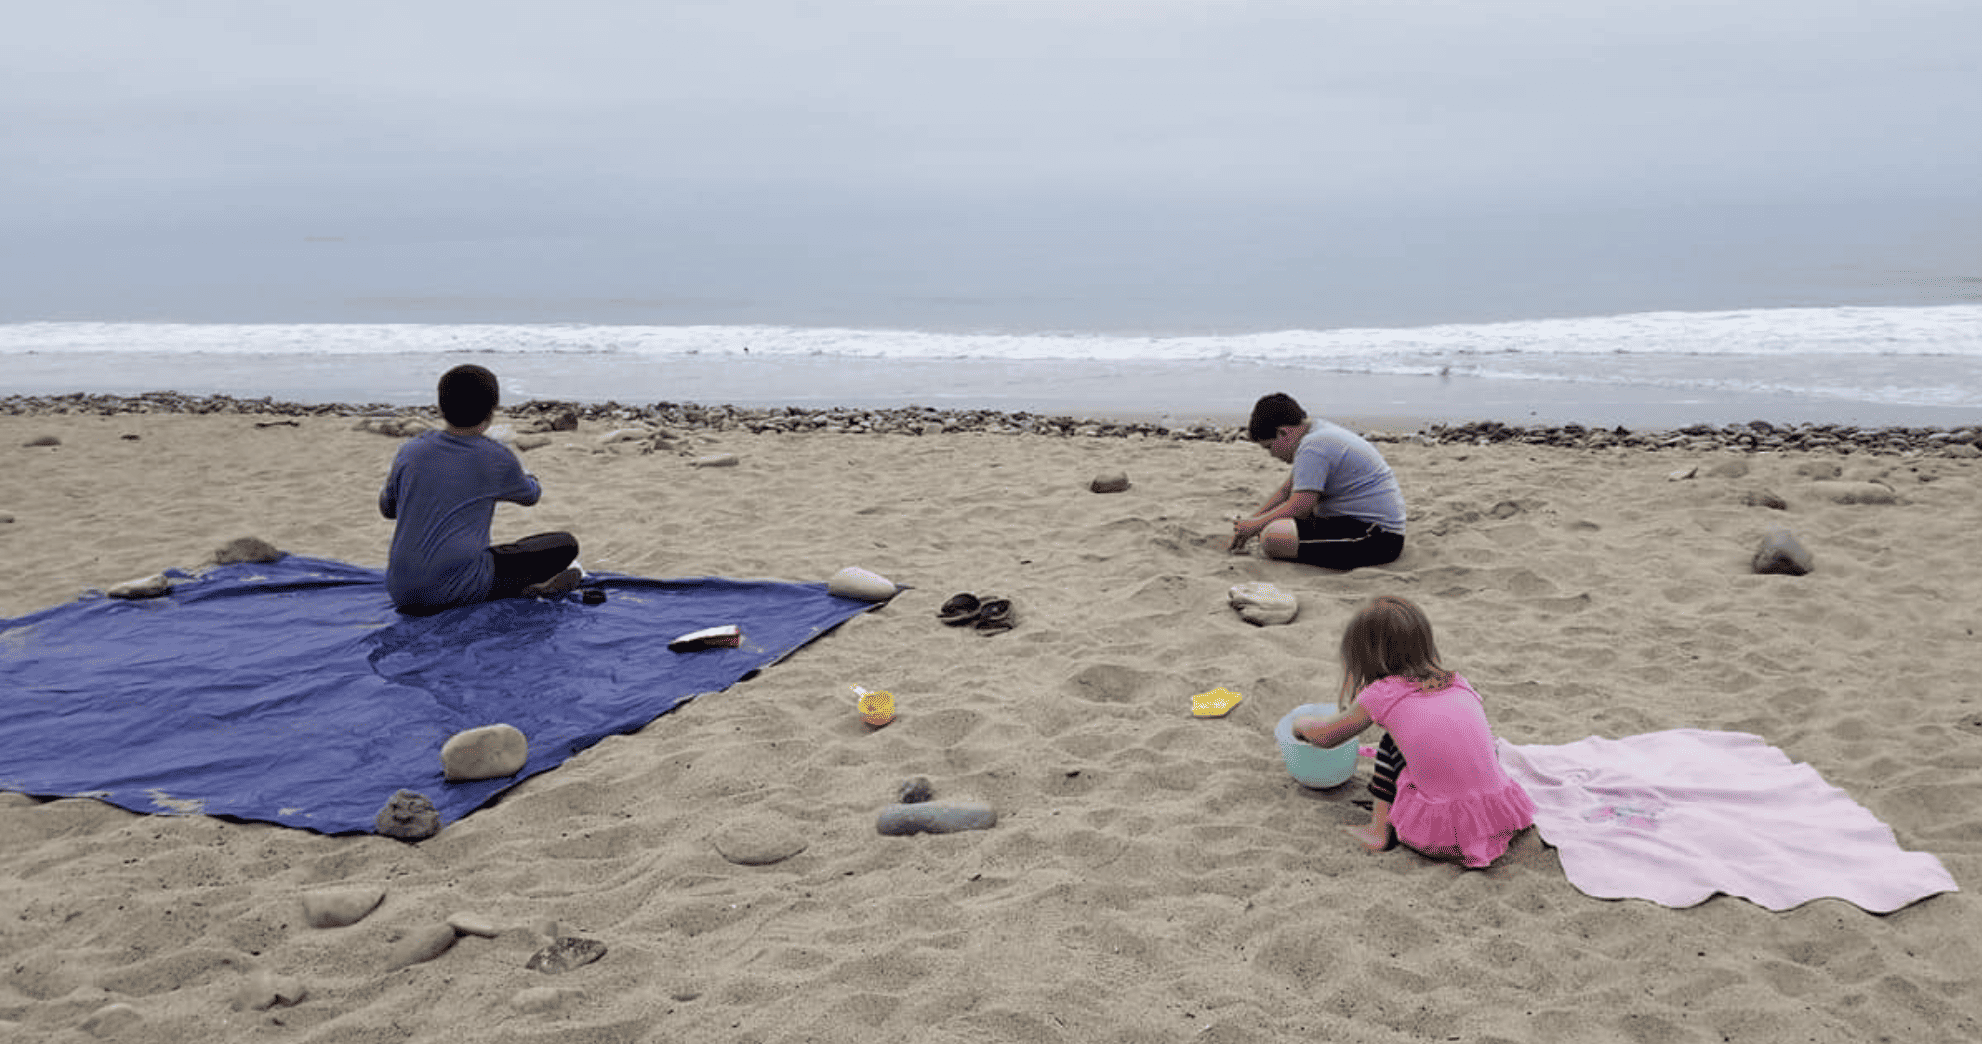 camping on the beach at Point Mugu State Park